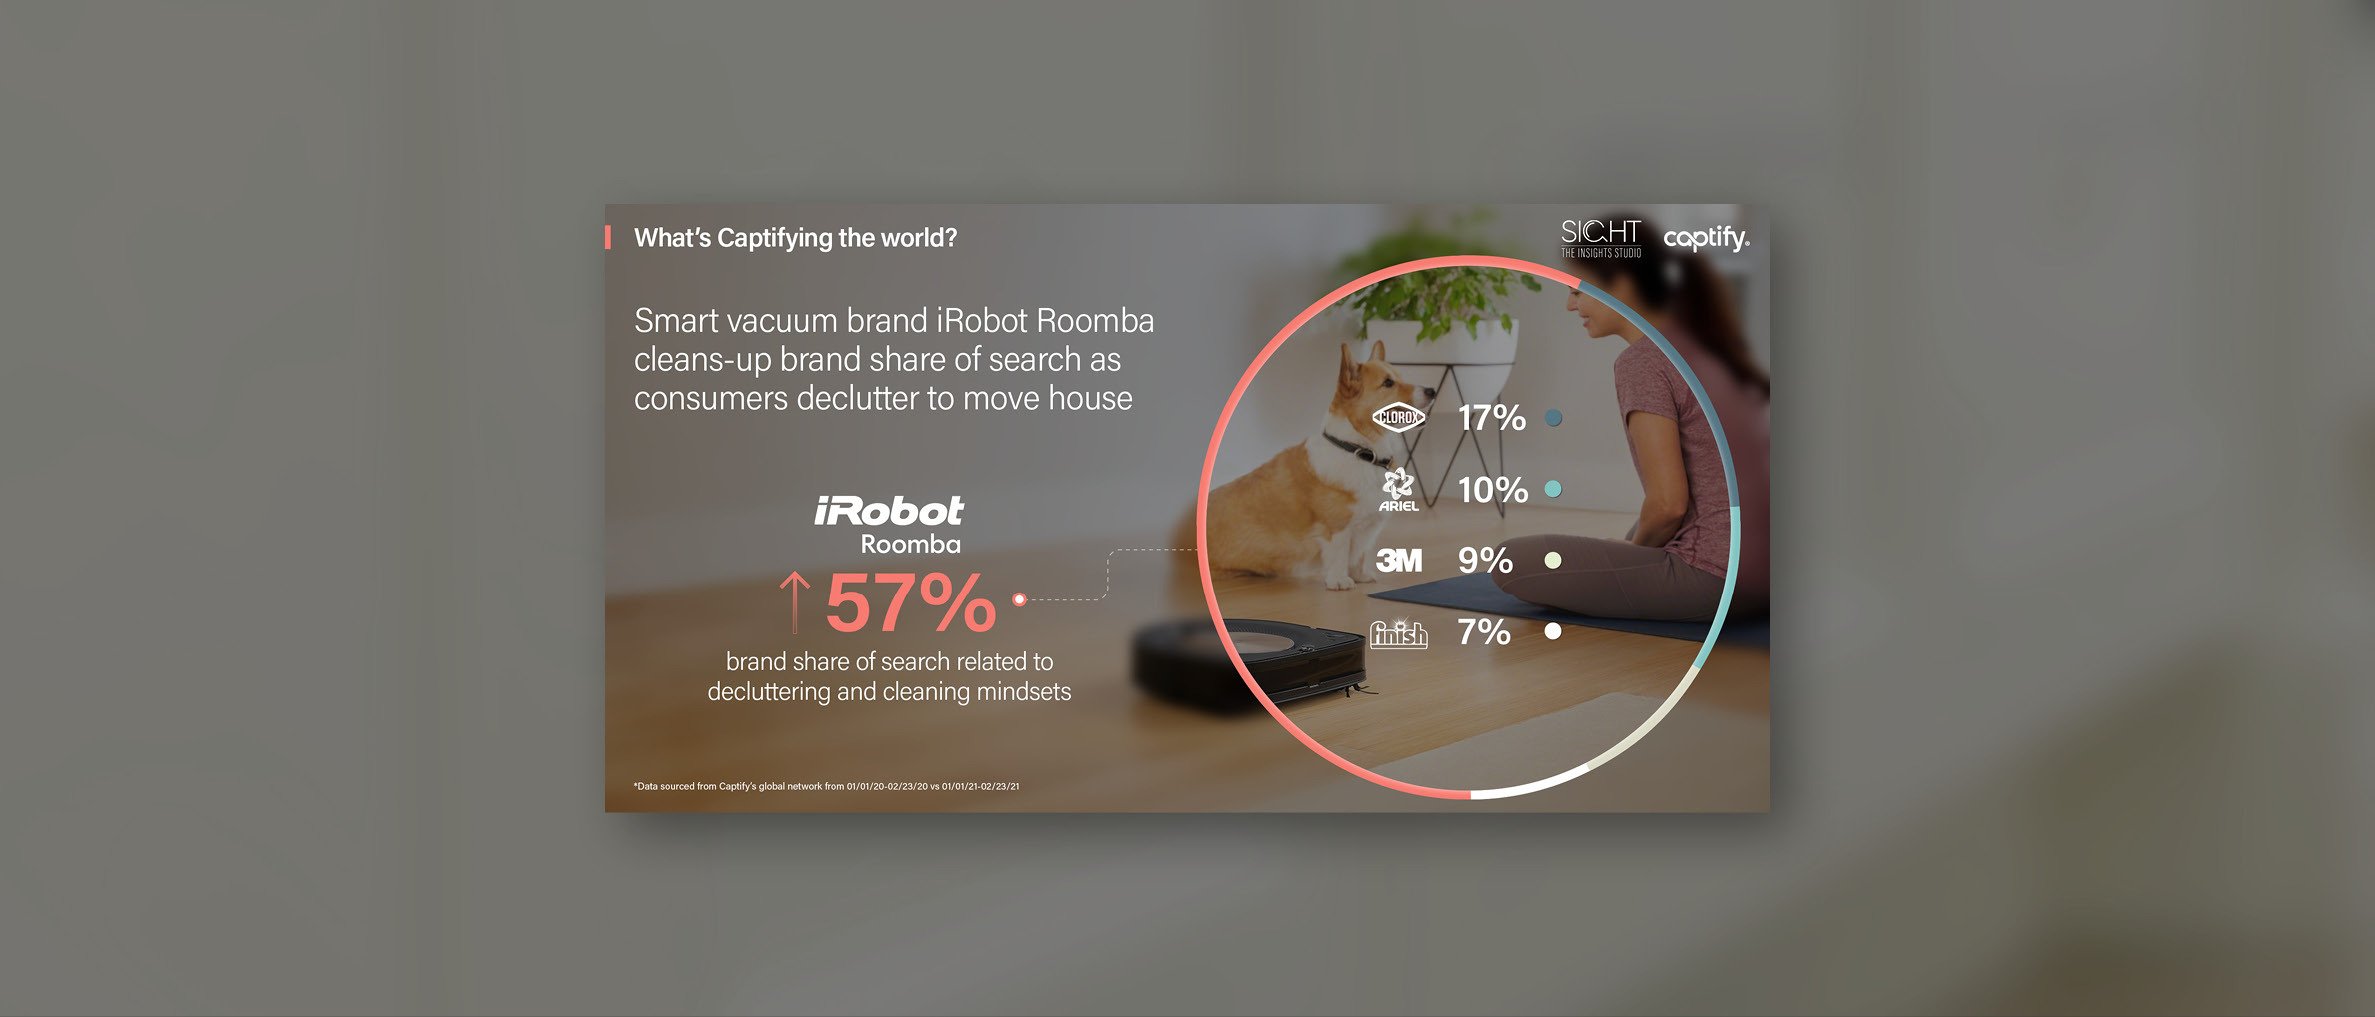 What’s Captifying the world: Smart vacuum brand iRobot Roomba cleans-up brand share of search as consumers declutter to move house